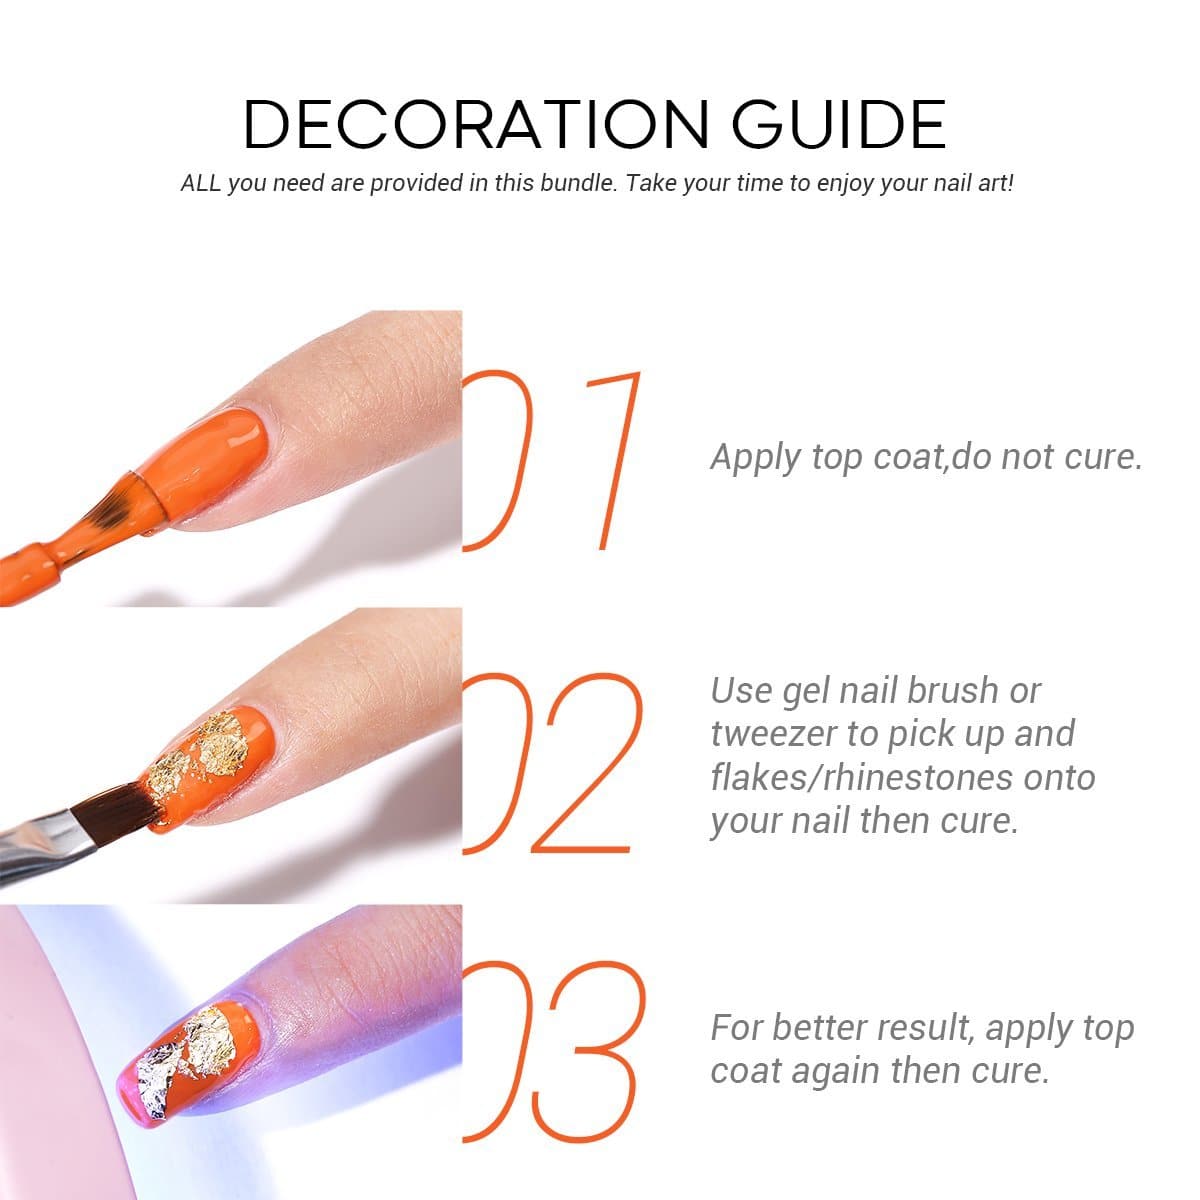 A nail art tool kit for beginners – SheKnows